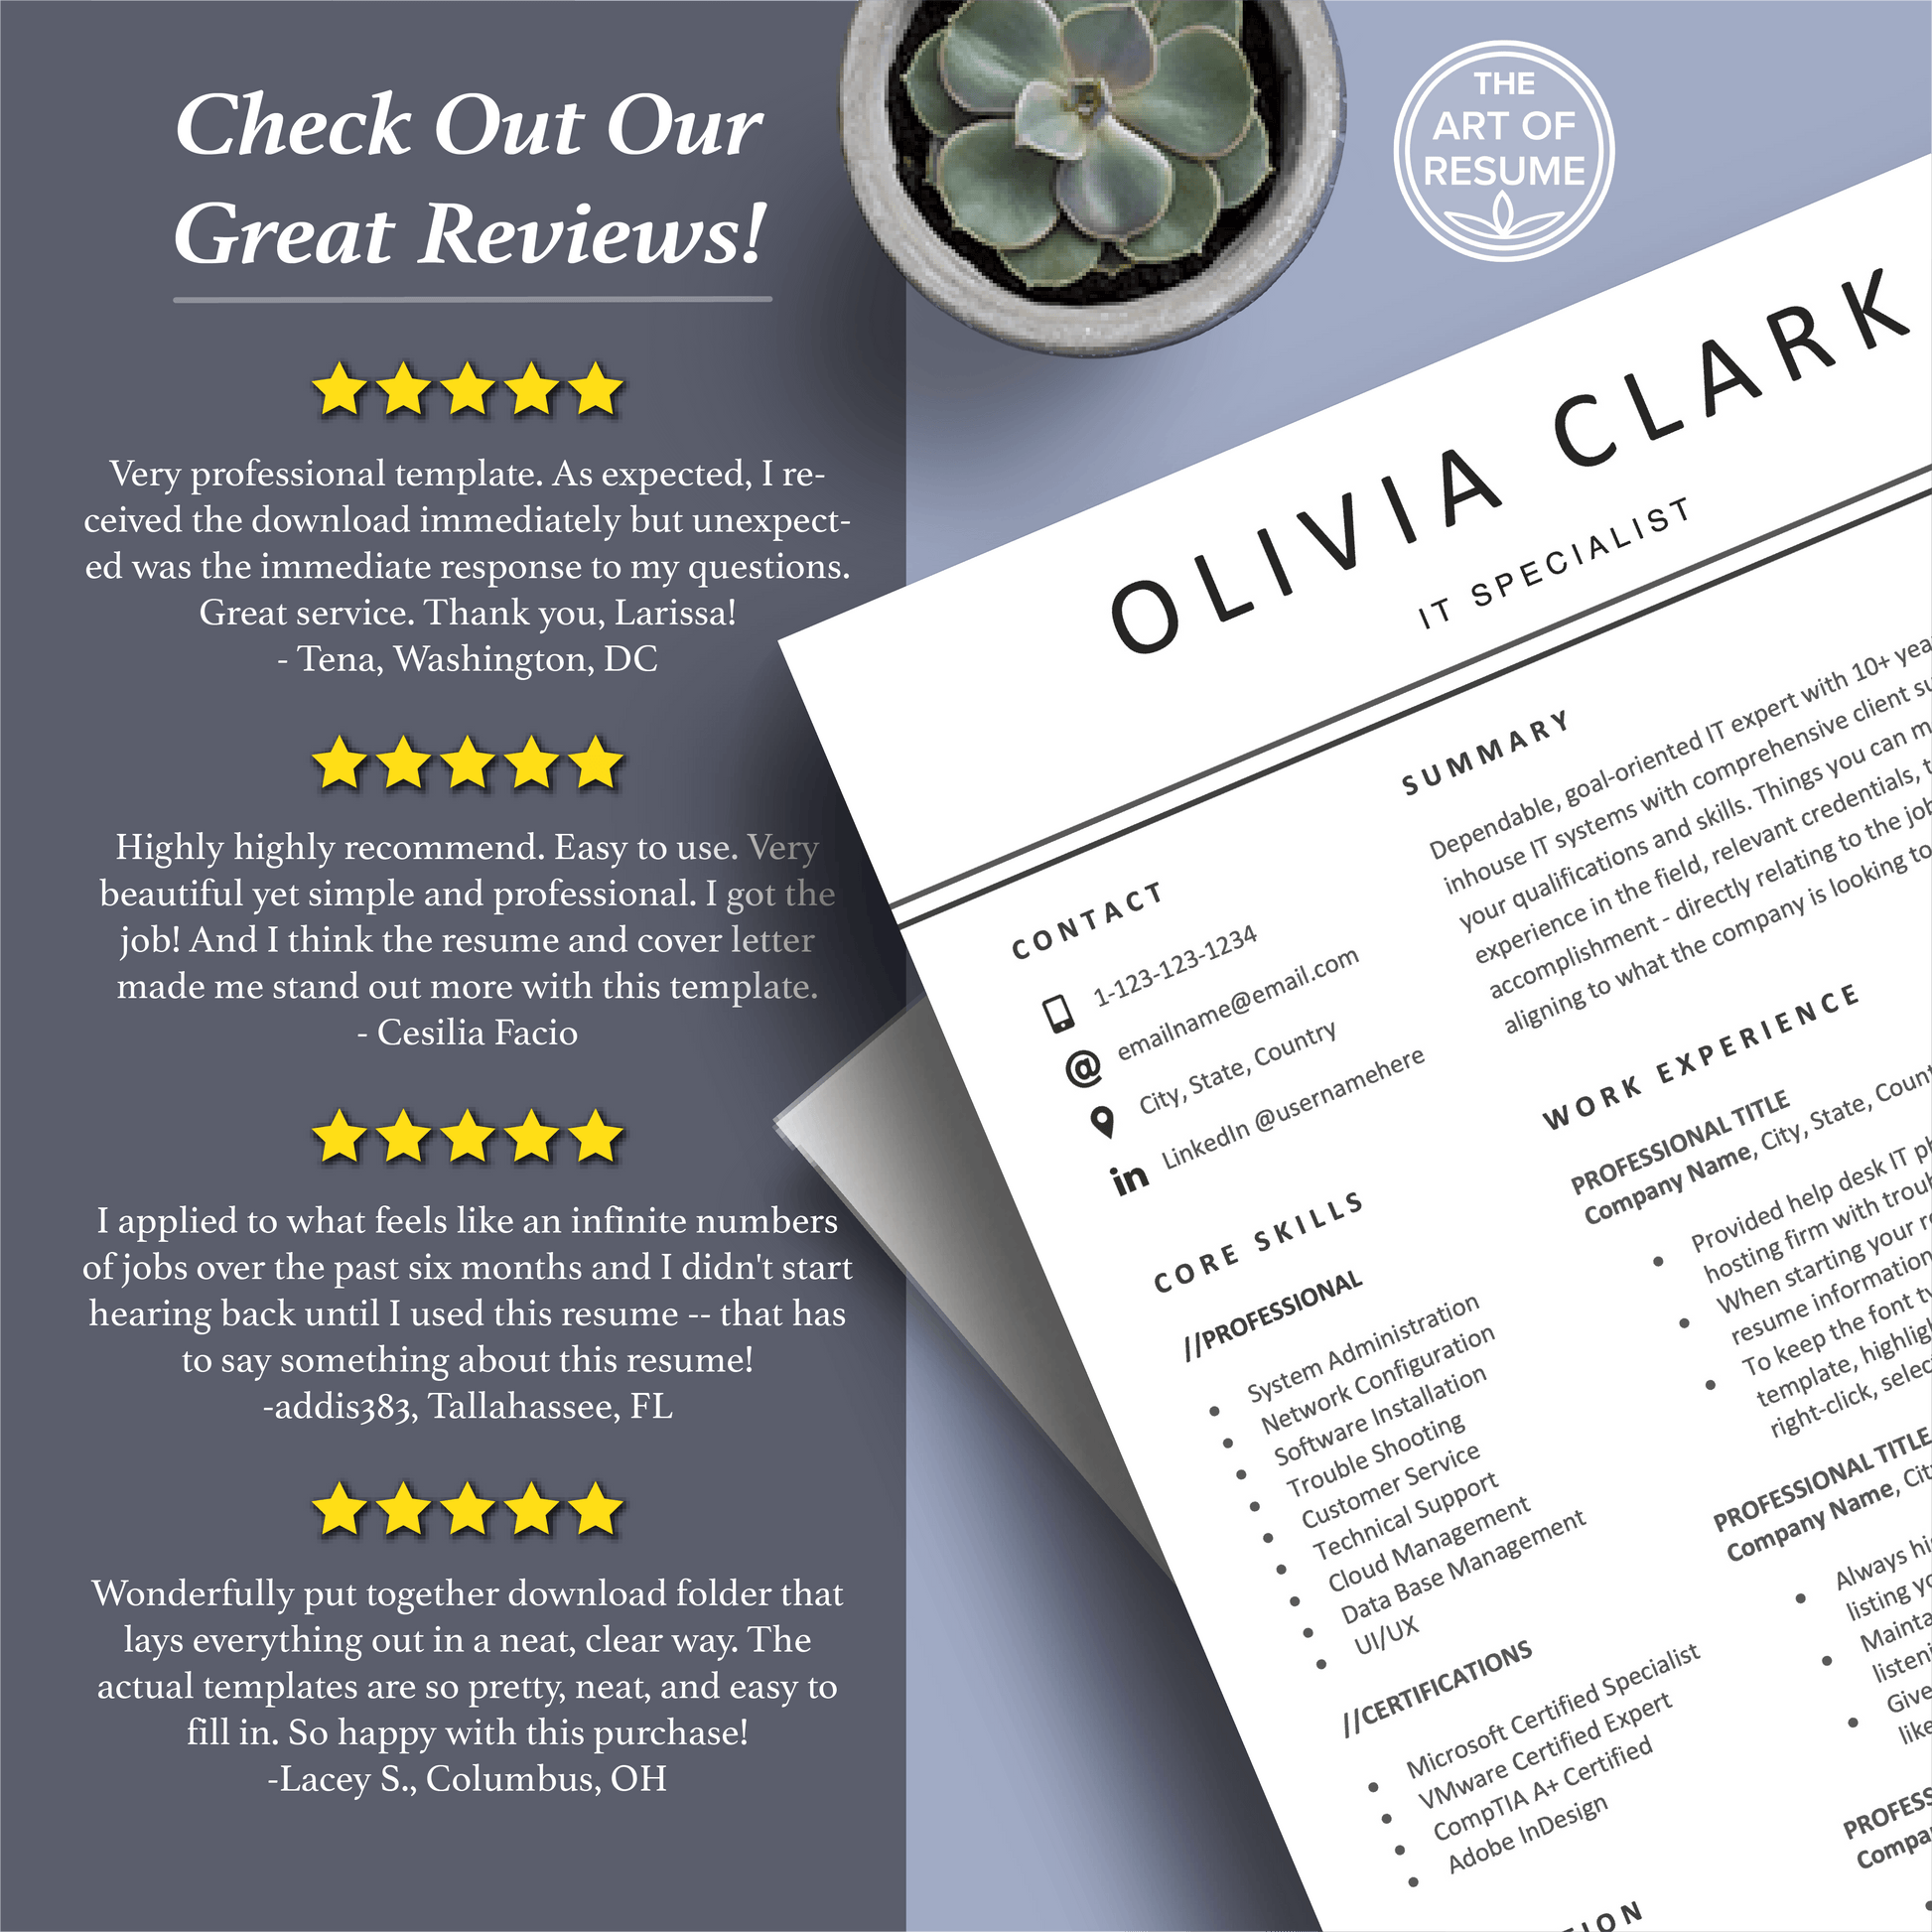 Professional Resume Download | 5-Page Simple CV Design - The Art of Resume